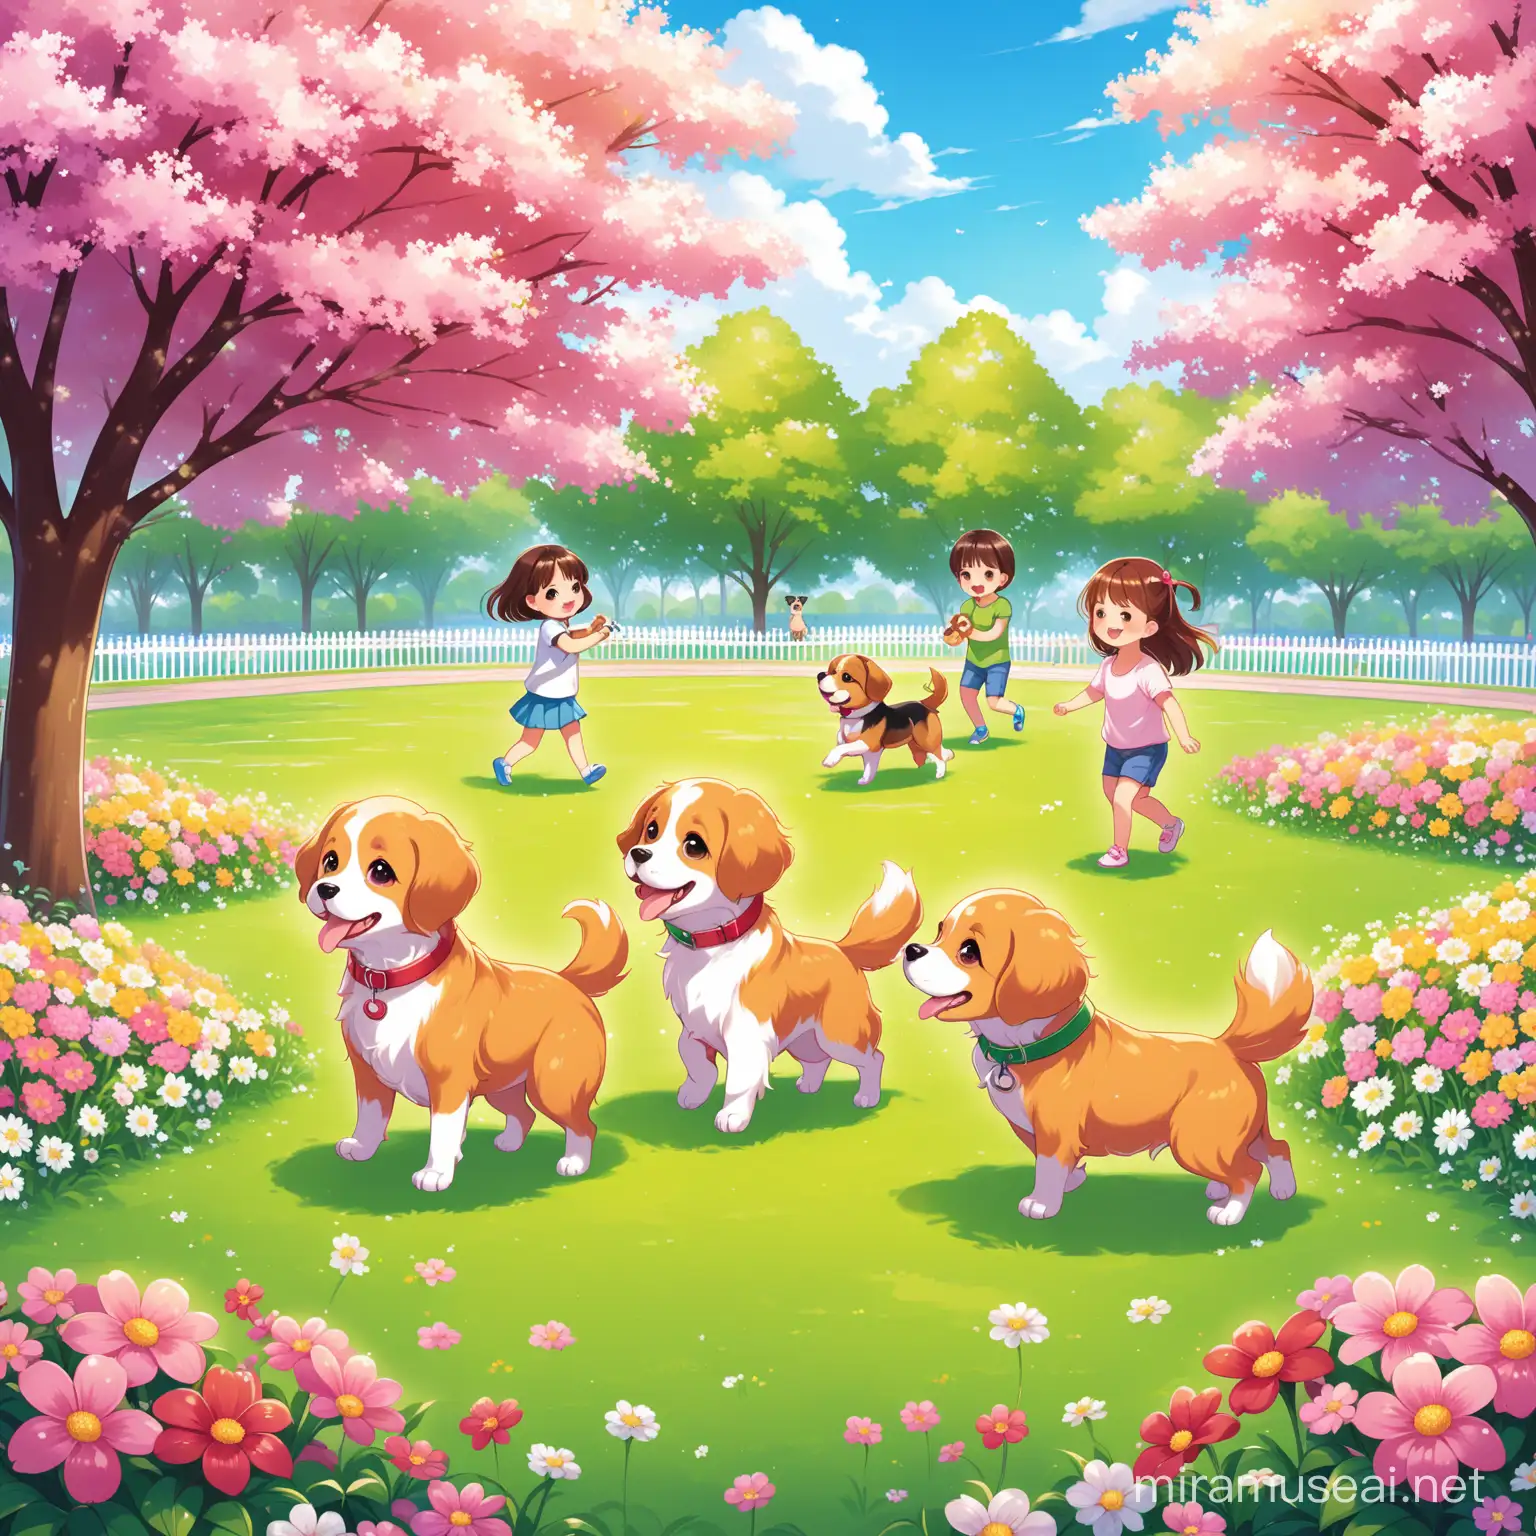 Playful Dogs Enjoying FlowerFilled Park with Children